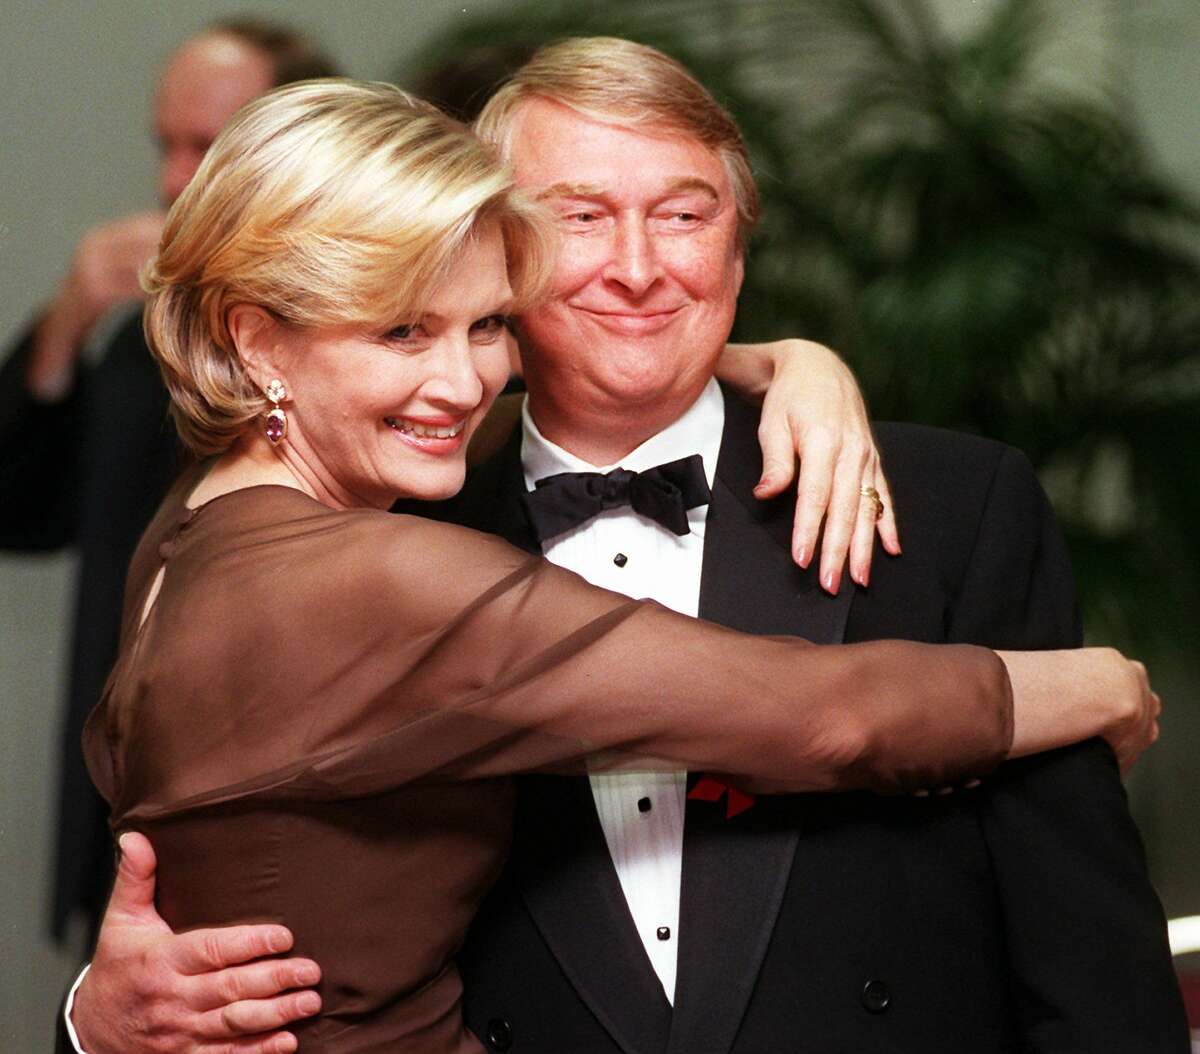 FILE - Television journalist Diane Sawyer and her husband, film director Mike Nichols, pose together at the Academy of Television Arts & Sciences’ 13th Annual Hall of Fame induction ceremonies, in this Nov. 1, 1997, file photo taken in the North Hollywood section of Los Angeles. ABC News confirms Mike Nichols, director and husband of Diane Sawyer, died Nov. 19, 2014. He was 83.